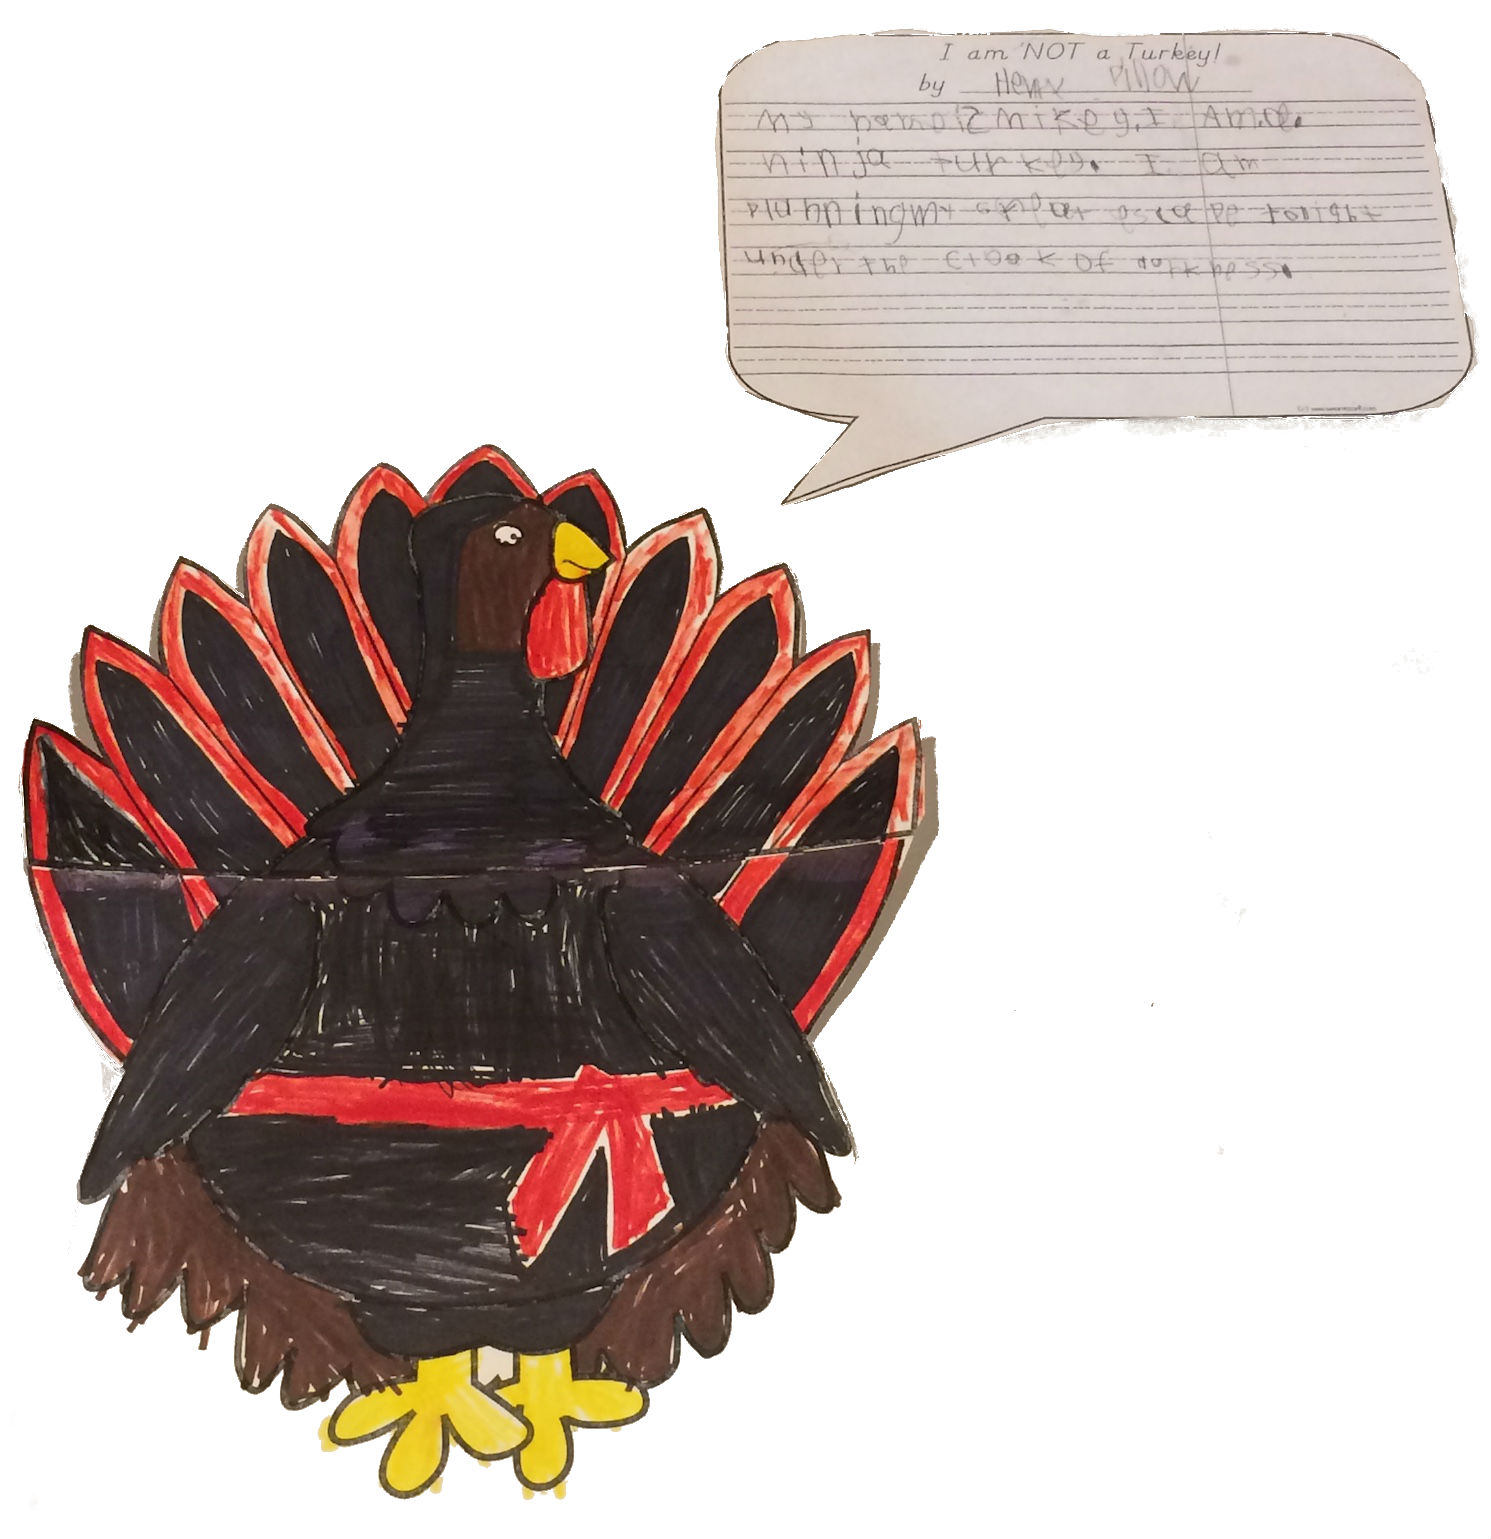 Child's drawing of a turkey in disguise